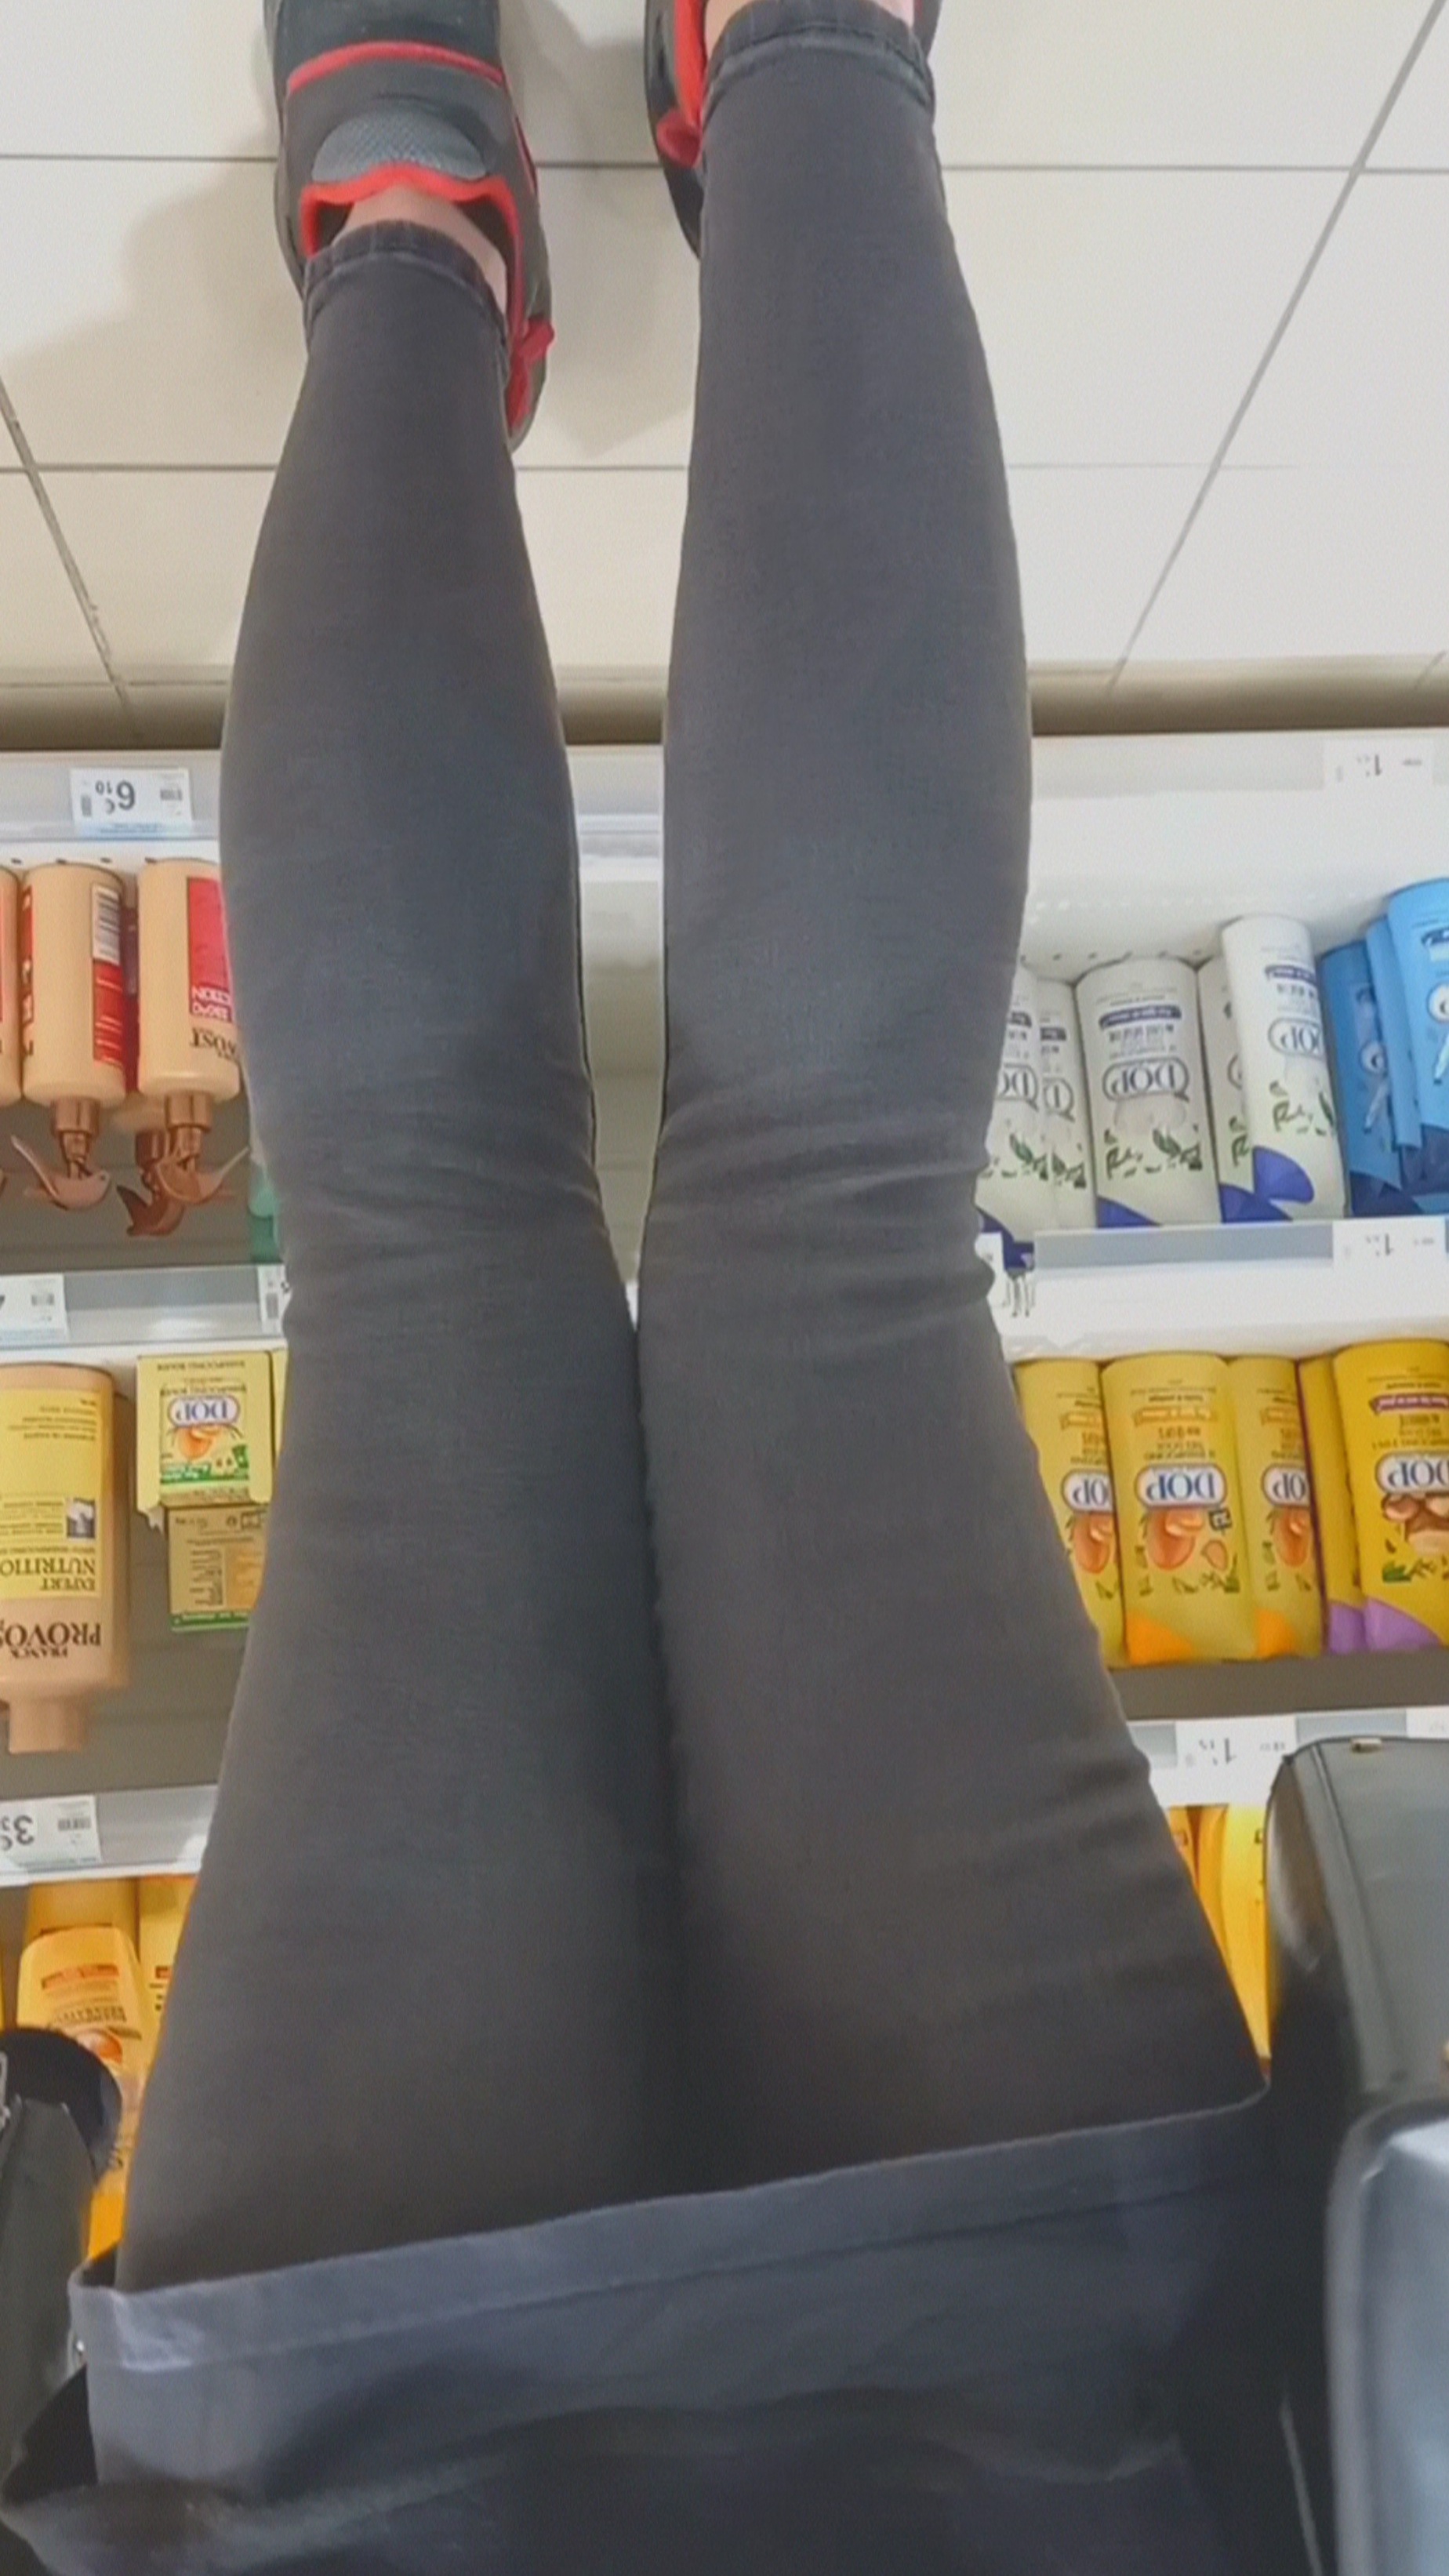 Girl with a tight jeans in store